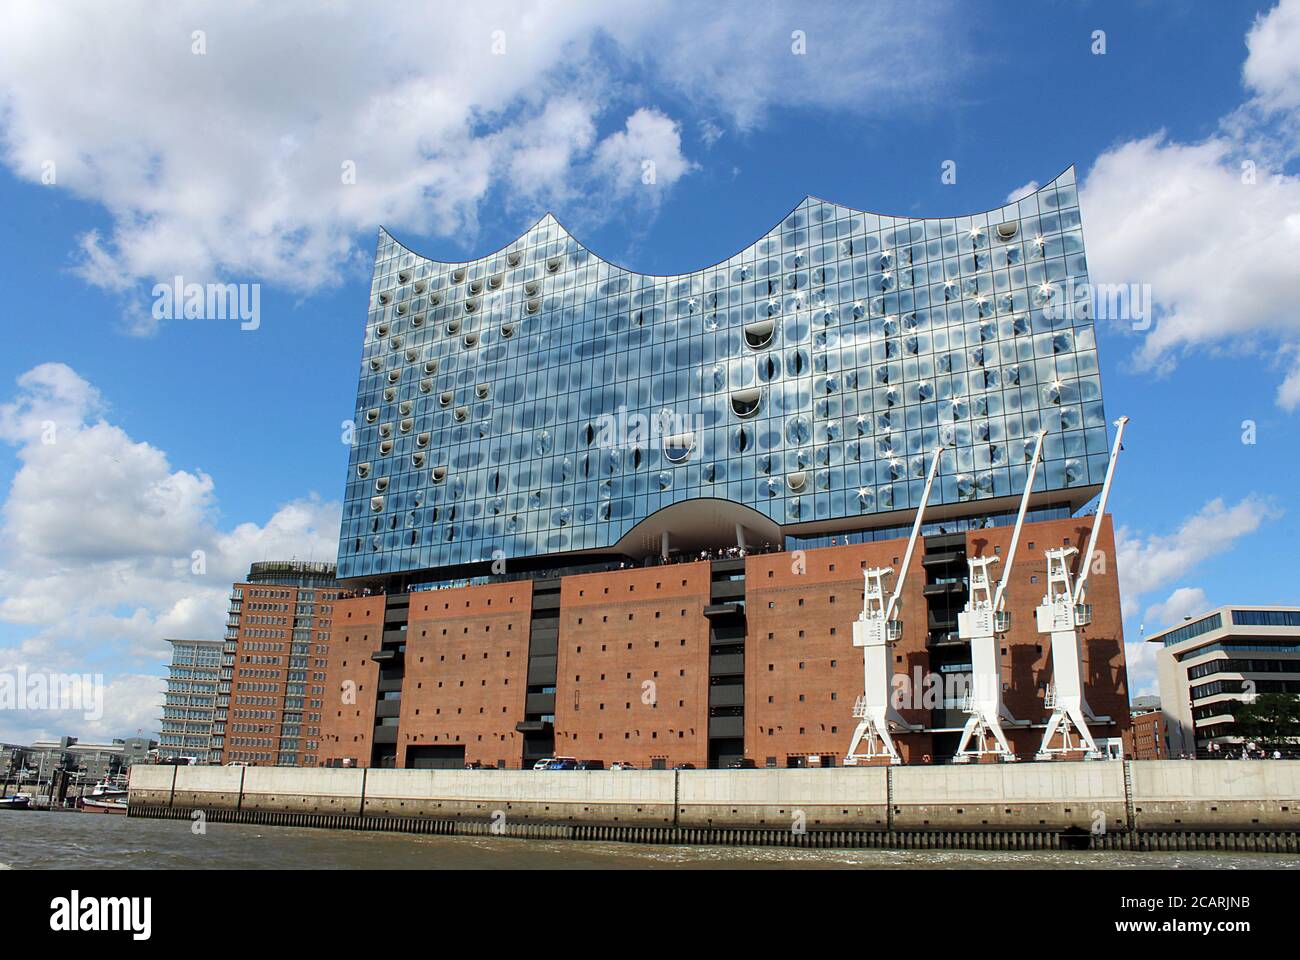 Hamburg, Germany - 28 July 2020: The concert hall Elbphilharmonie in the HafenCity quarter in Hamburg seen from the river Elbe. Stock Photo